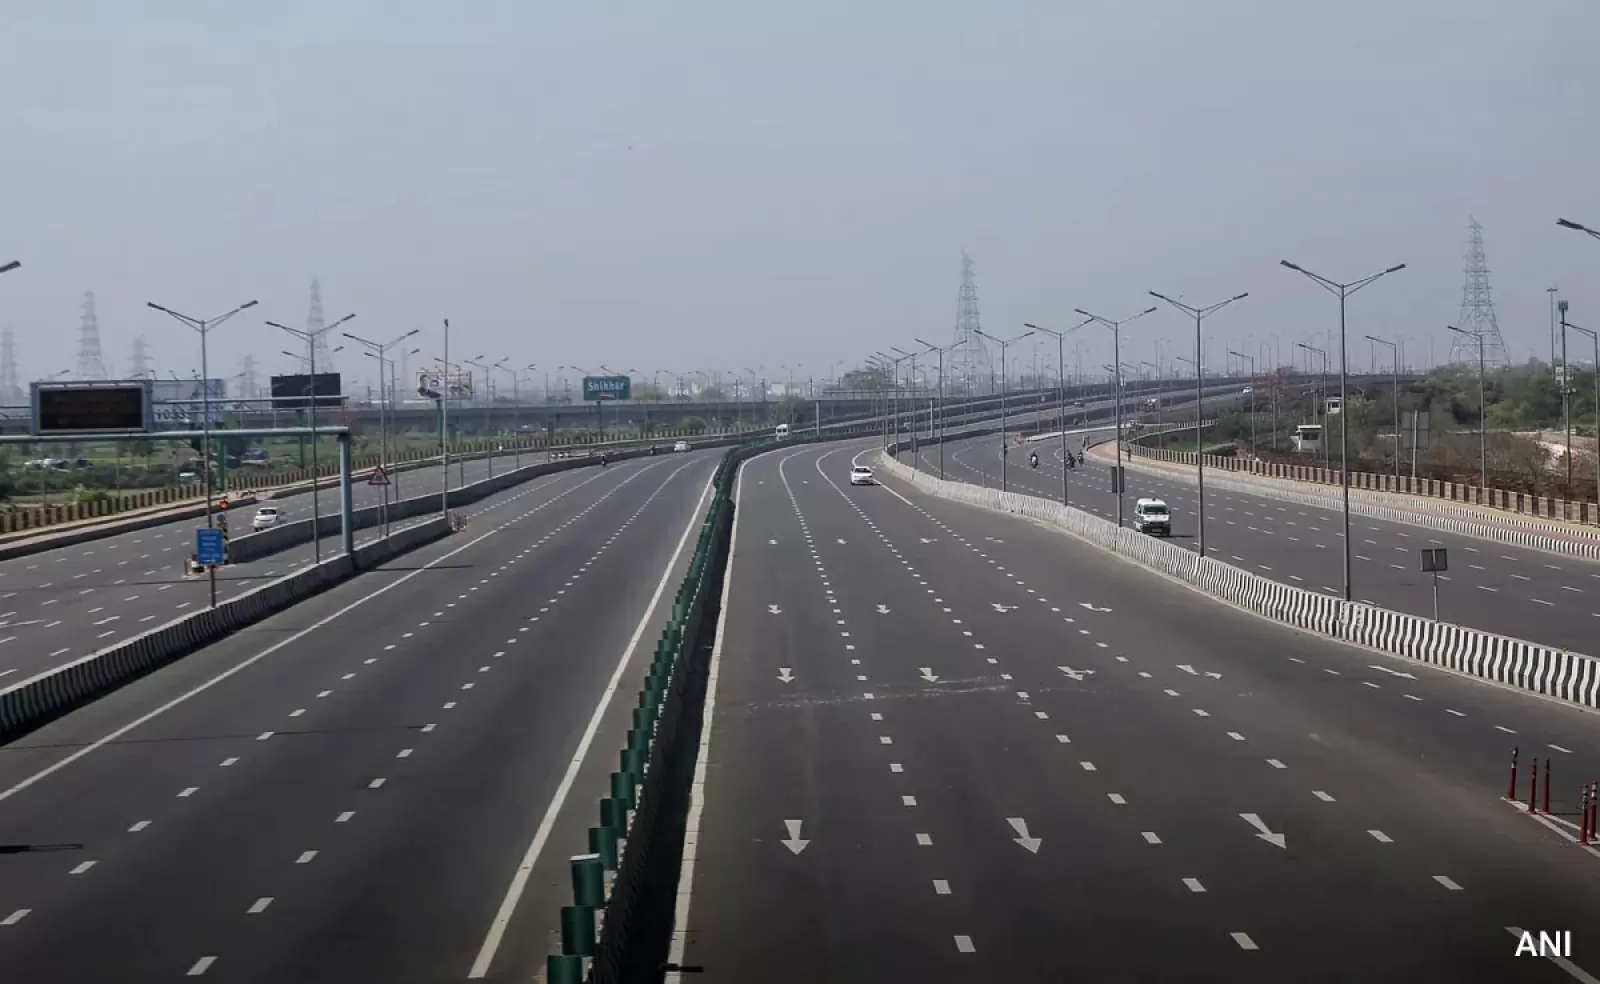 India has constructed a network of 92,000 km of national highways in the last 9.5 years; this new record will be made soon